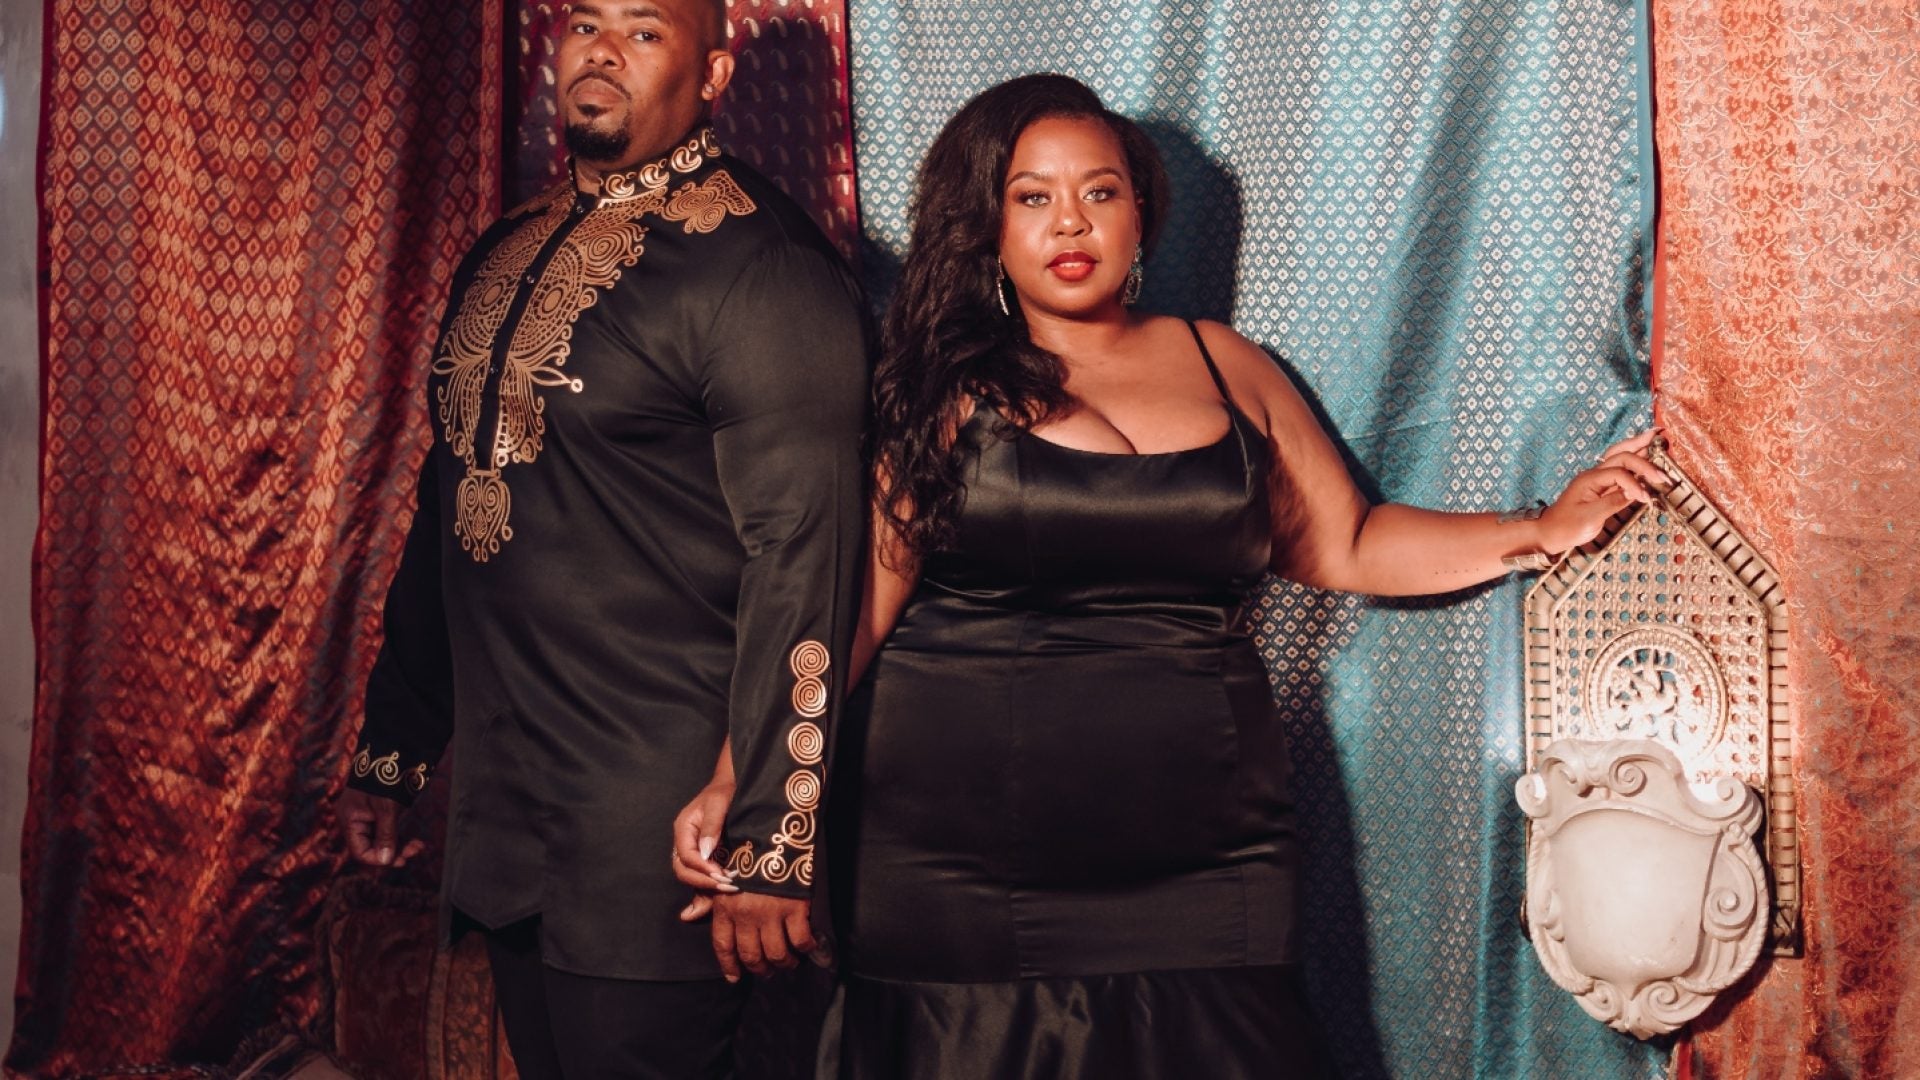 After Her Engagement Photos Were Body Shamed, Houston's First Daughter Wants More Visibility For Curvy Brides